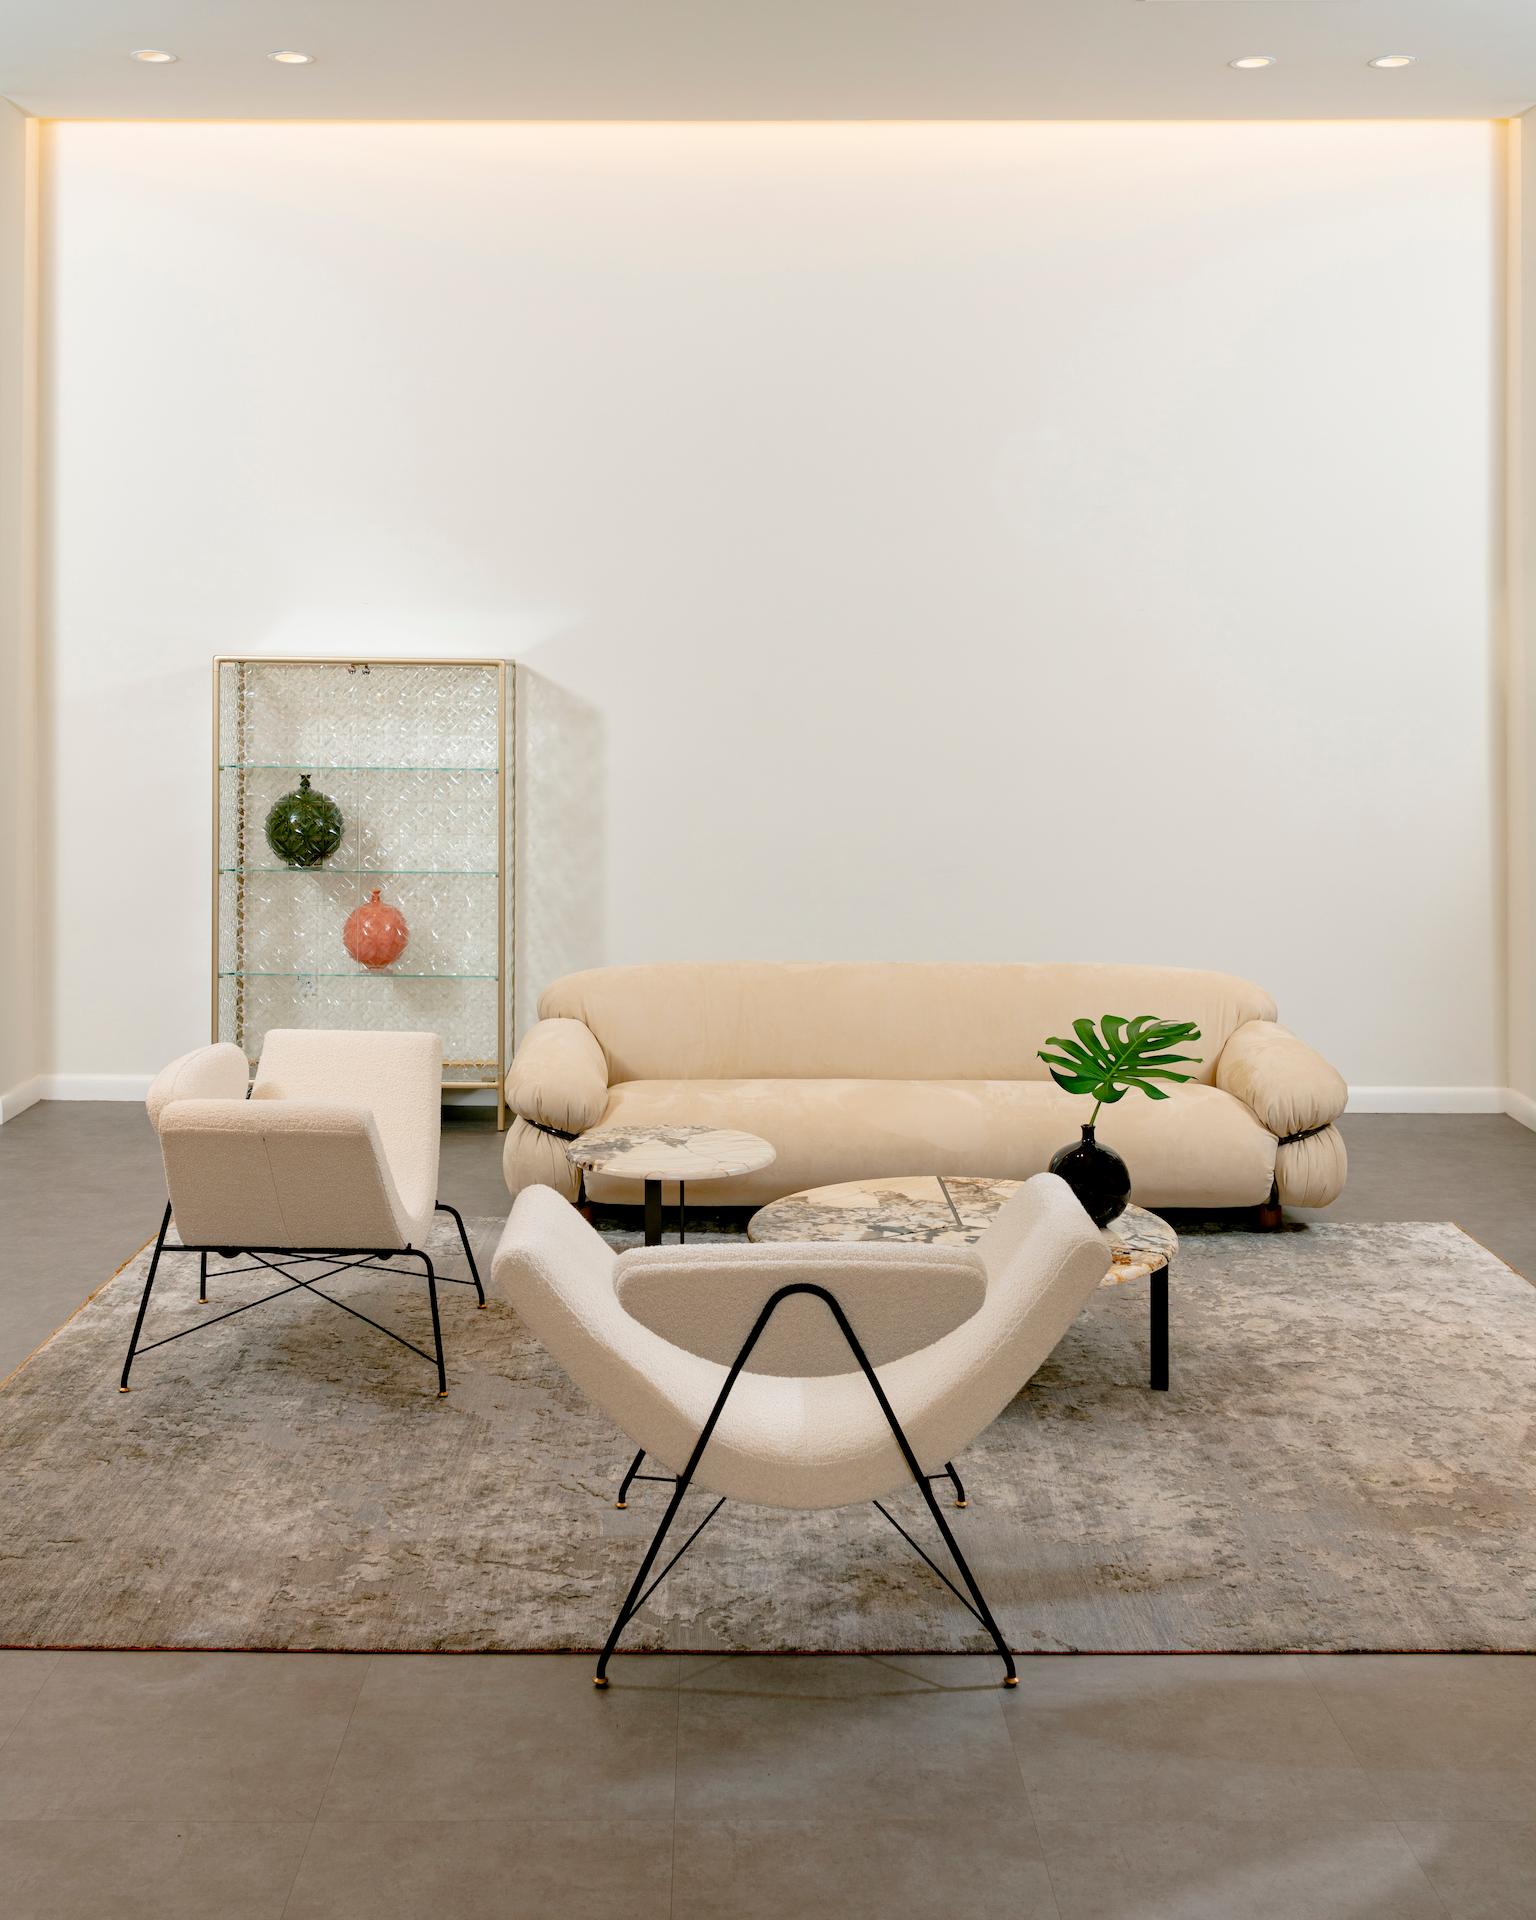 upholstered in Dedar karakorum Ivory
Fruit of the creative genius of the architect and designer Martin Eisler, Reversível is an historic piece of Carioca design, and Tacchini fell in love with its incredibly innovative style. With the simplicity of